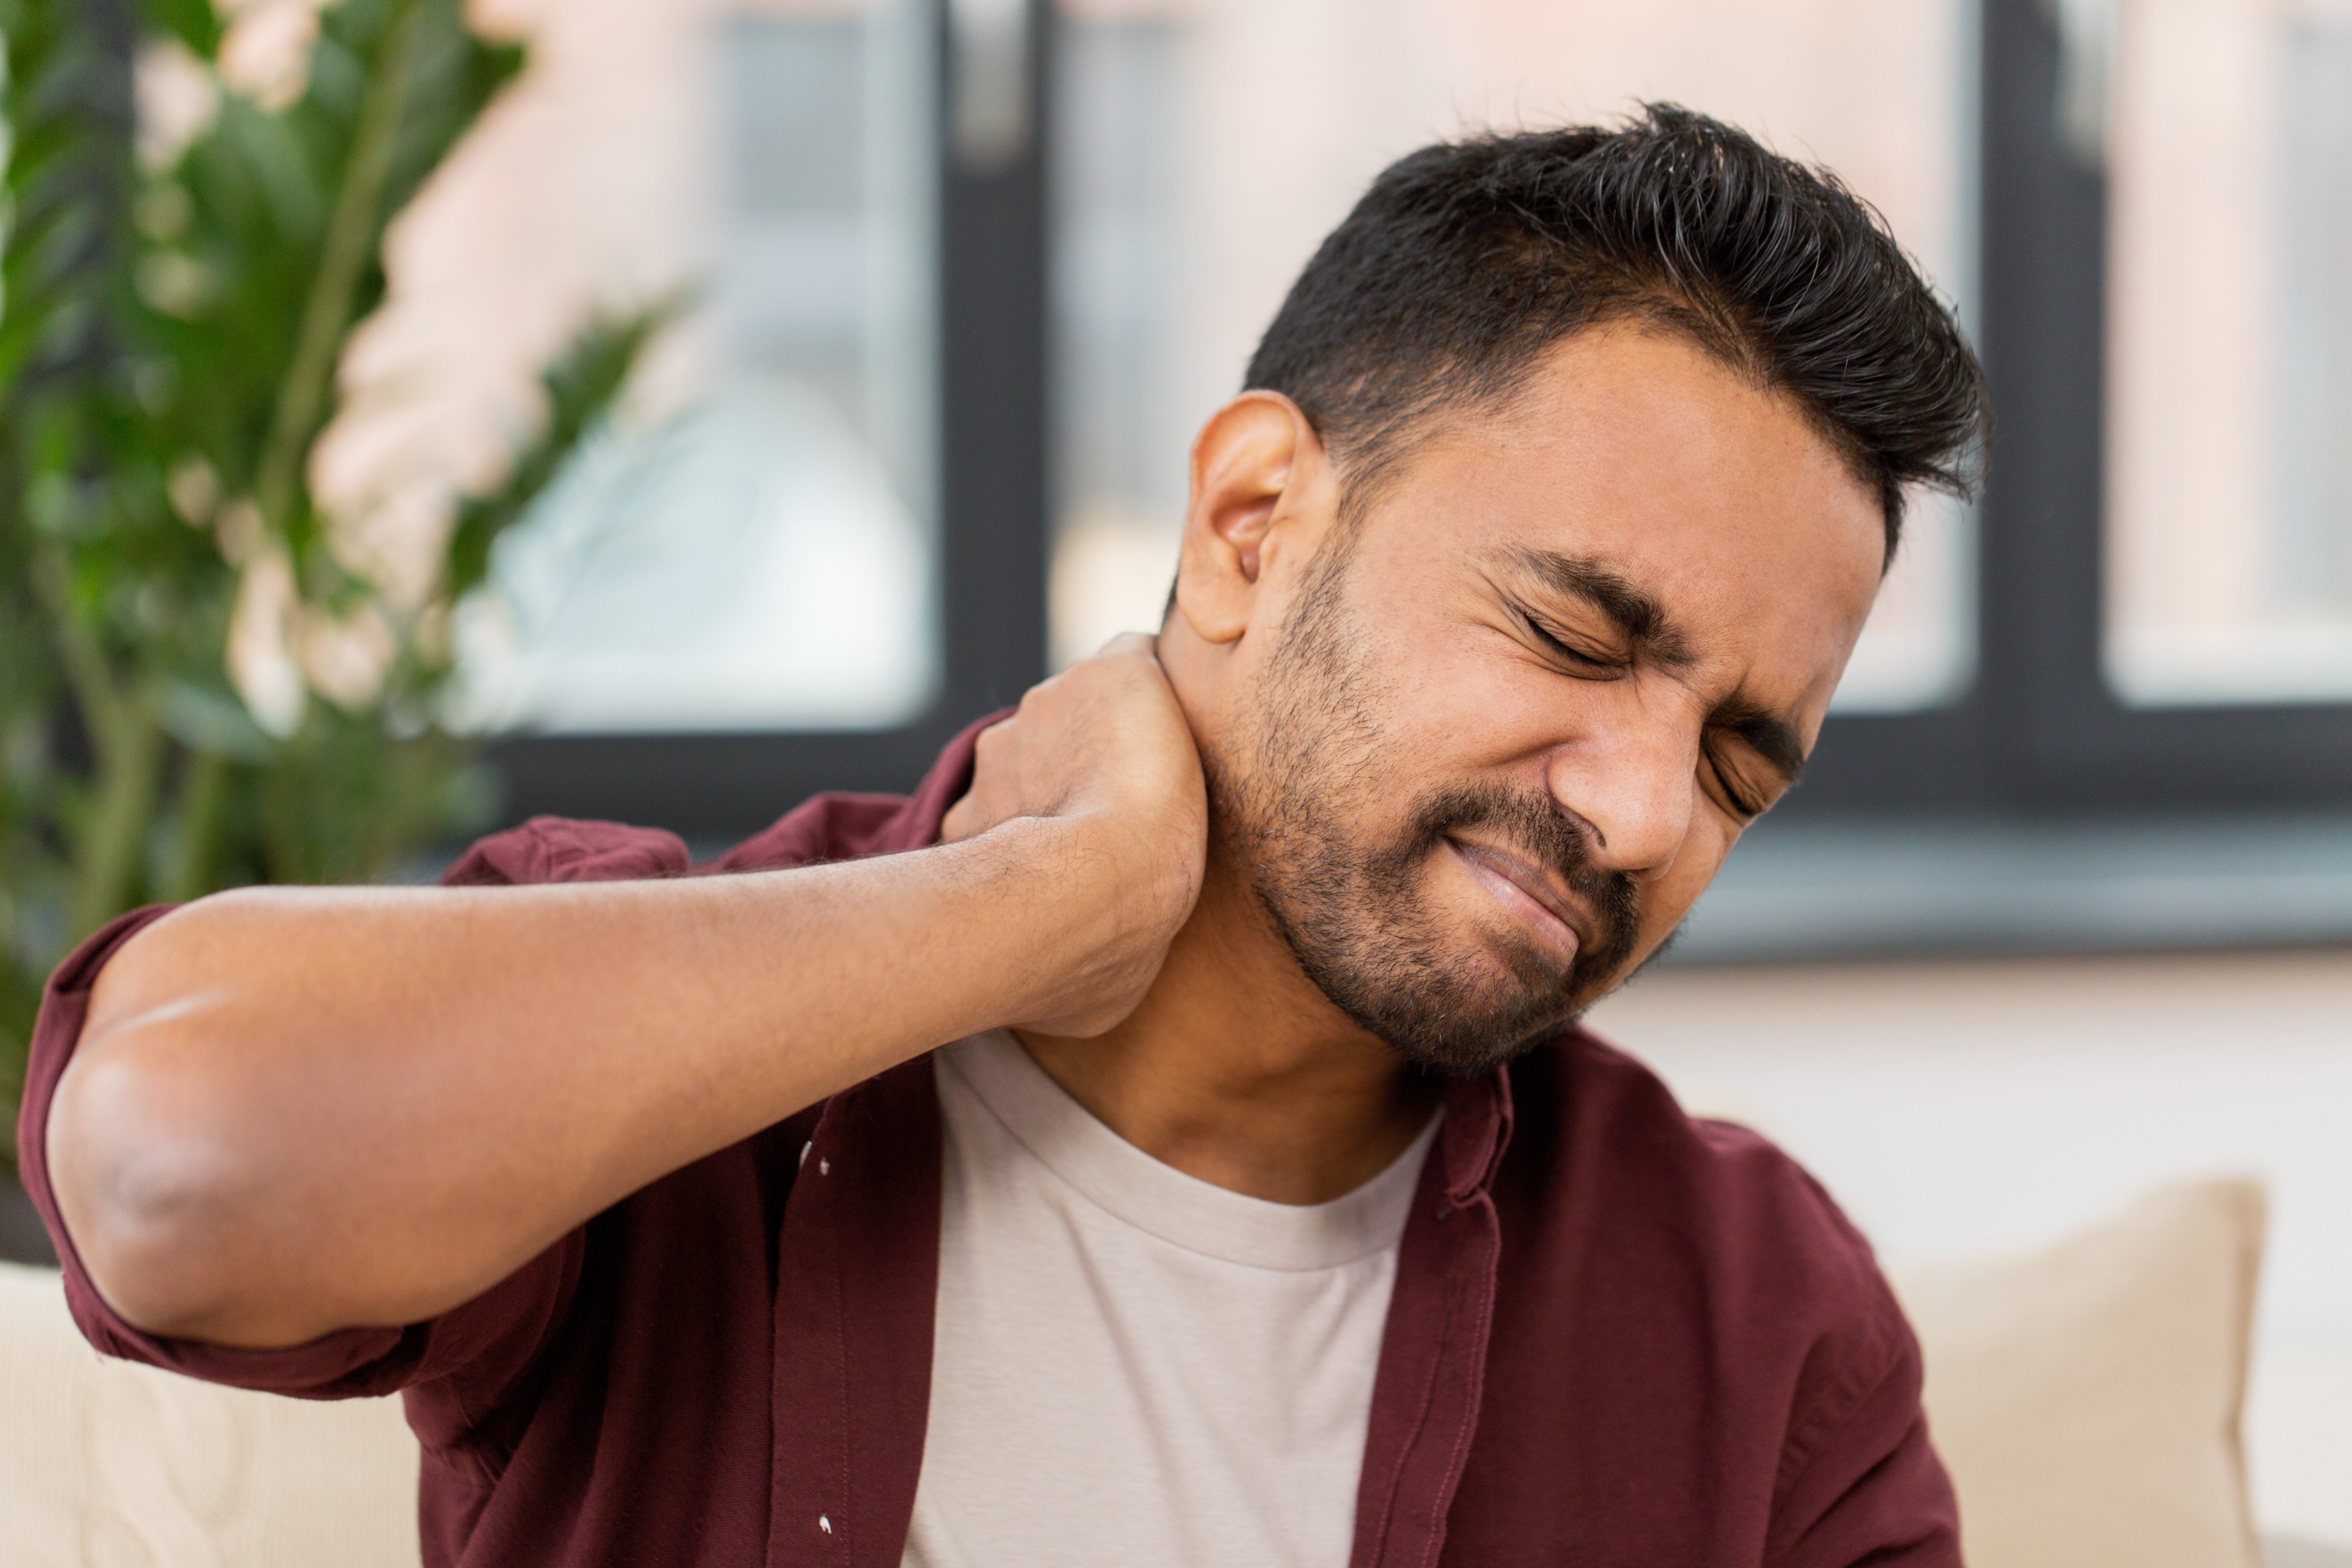 Treatment of Pinched Nerve in the Neck in NJ